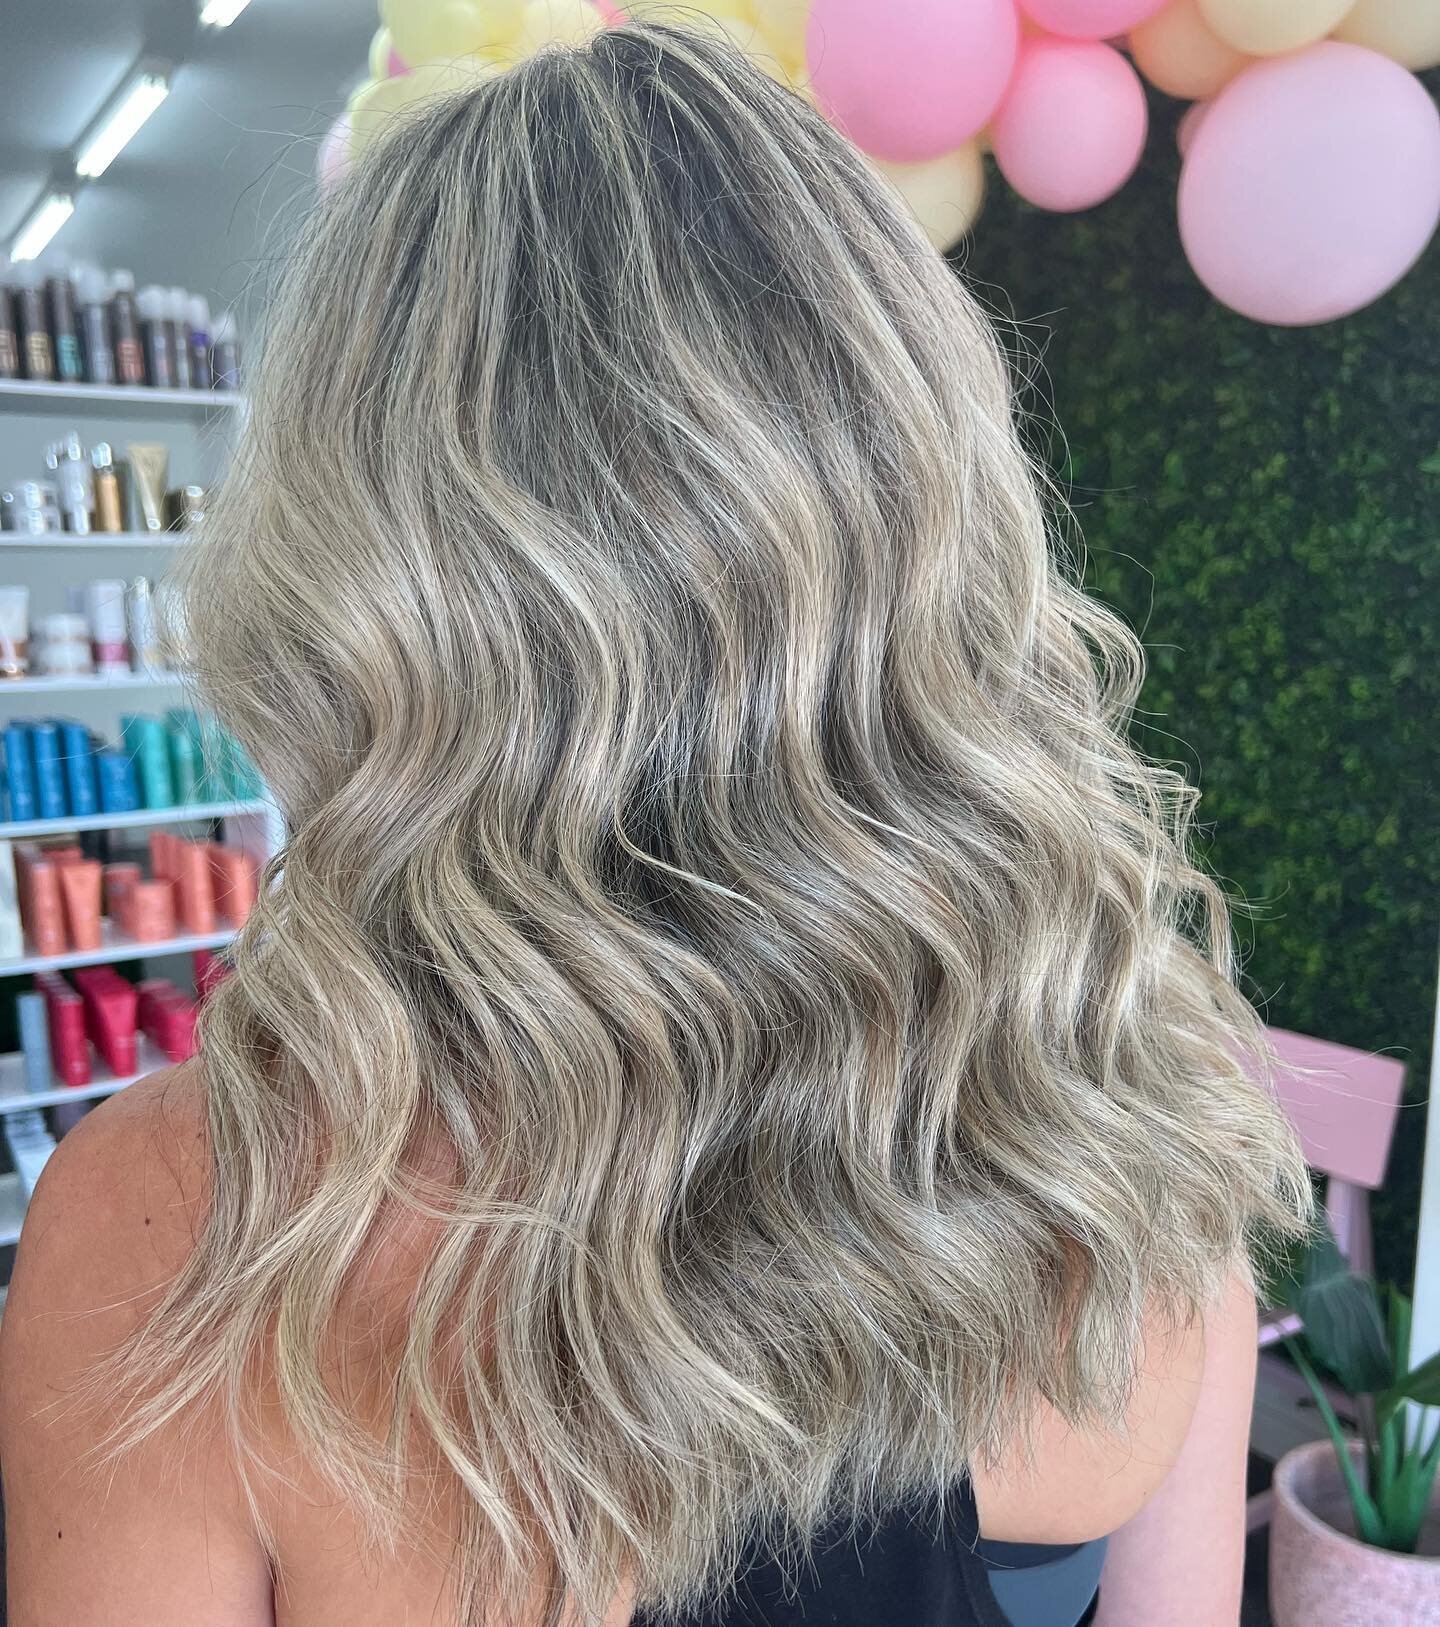 C O O L  T O N E S ❄️ WOW check out this transformation &lt;&lt; swipe for the before photo! With months of regrowth we managed to bring this hair back to life &amp; finish off with a shinefinity Ash toner 💗